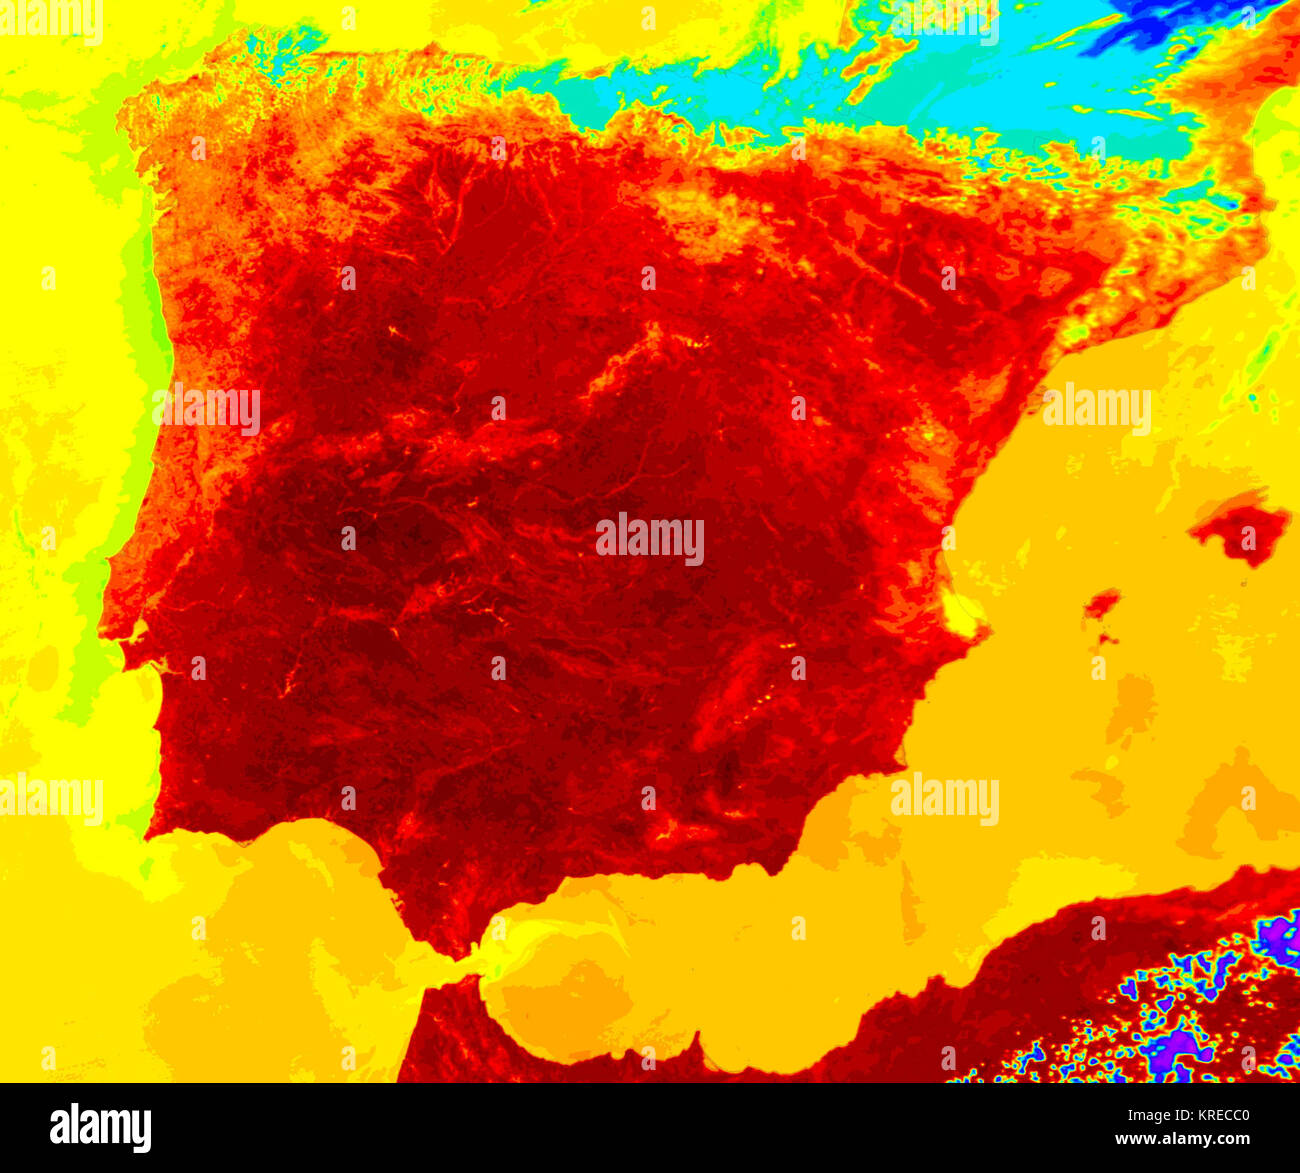 Summer Heatwave in Spain  On July 1, 2004, Spain (roughly the right-most three-quarters of the peninsula) and Portugal (left-hand quarter) were in the midst of a blistering heat wave that cost several people their lives. When the Moderate Resolution Imaging Spectroradiometer (MODIS) on the Aqua satellite captured this image (13:35 UTC, or 2:35 p.m. local time in Lisbon, Portugal) cool, sheltering clouds hugged only the northern coastline, while the rest of the country baked in the Sun. The image shown here is land surface temperature observations collected by MODIS that scientists have color-c Stock Photo